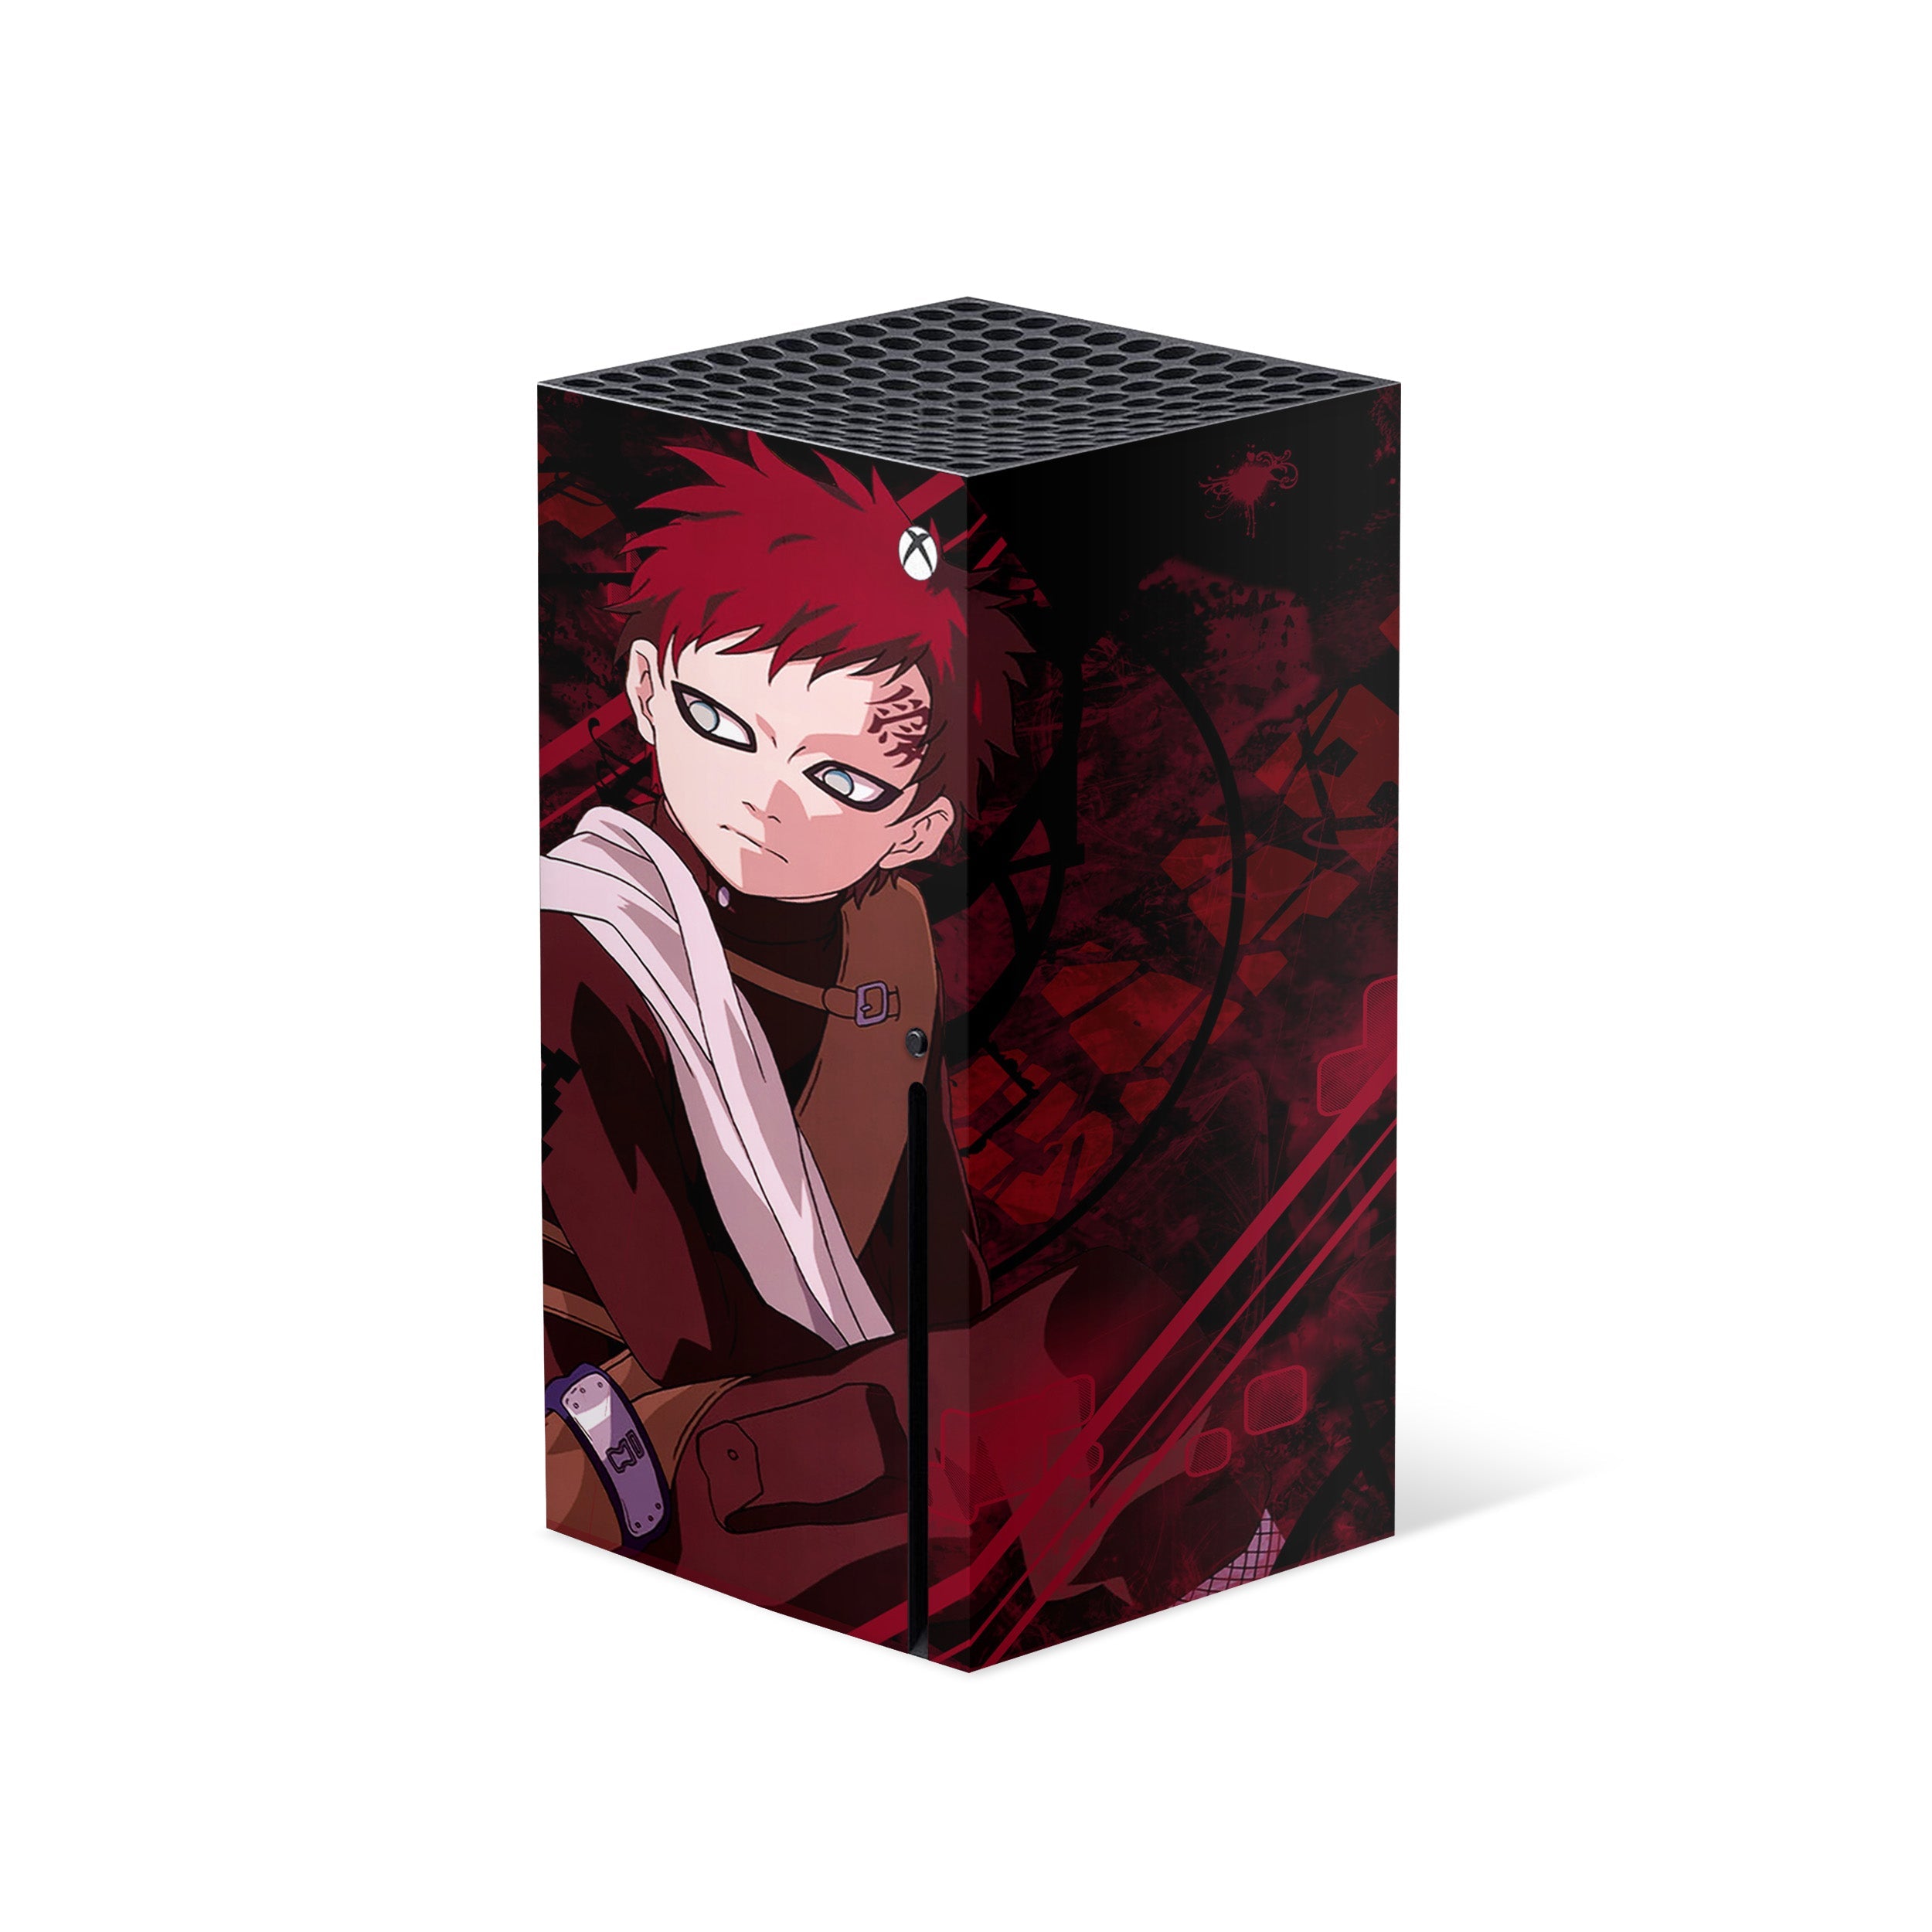 A video game skin featuring a Naruto Gaara design for the Xbox Series X.